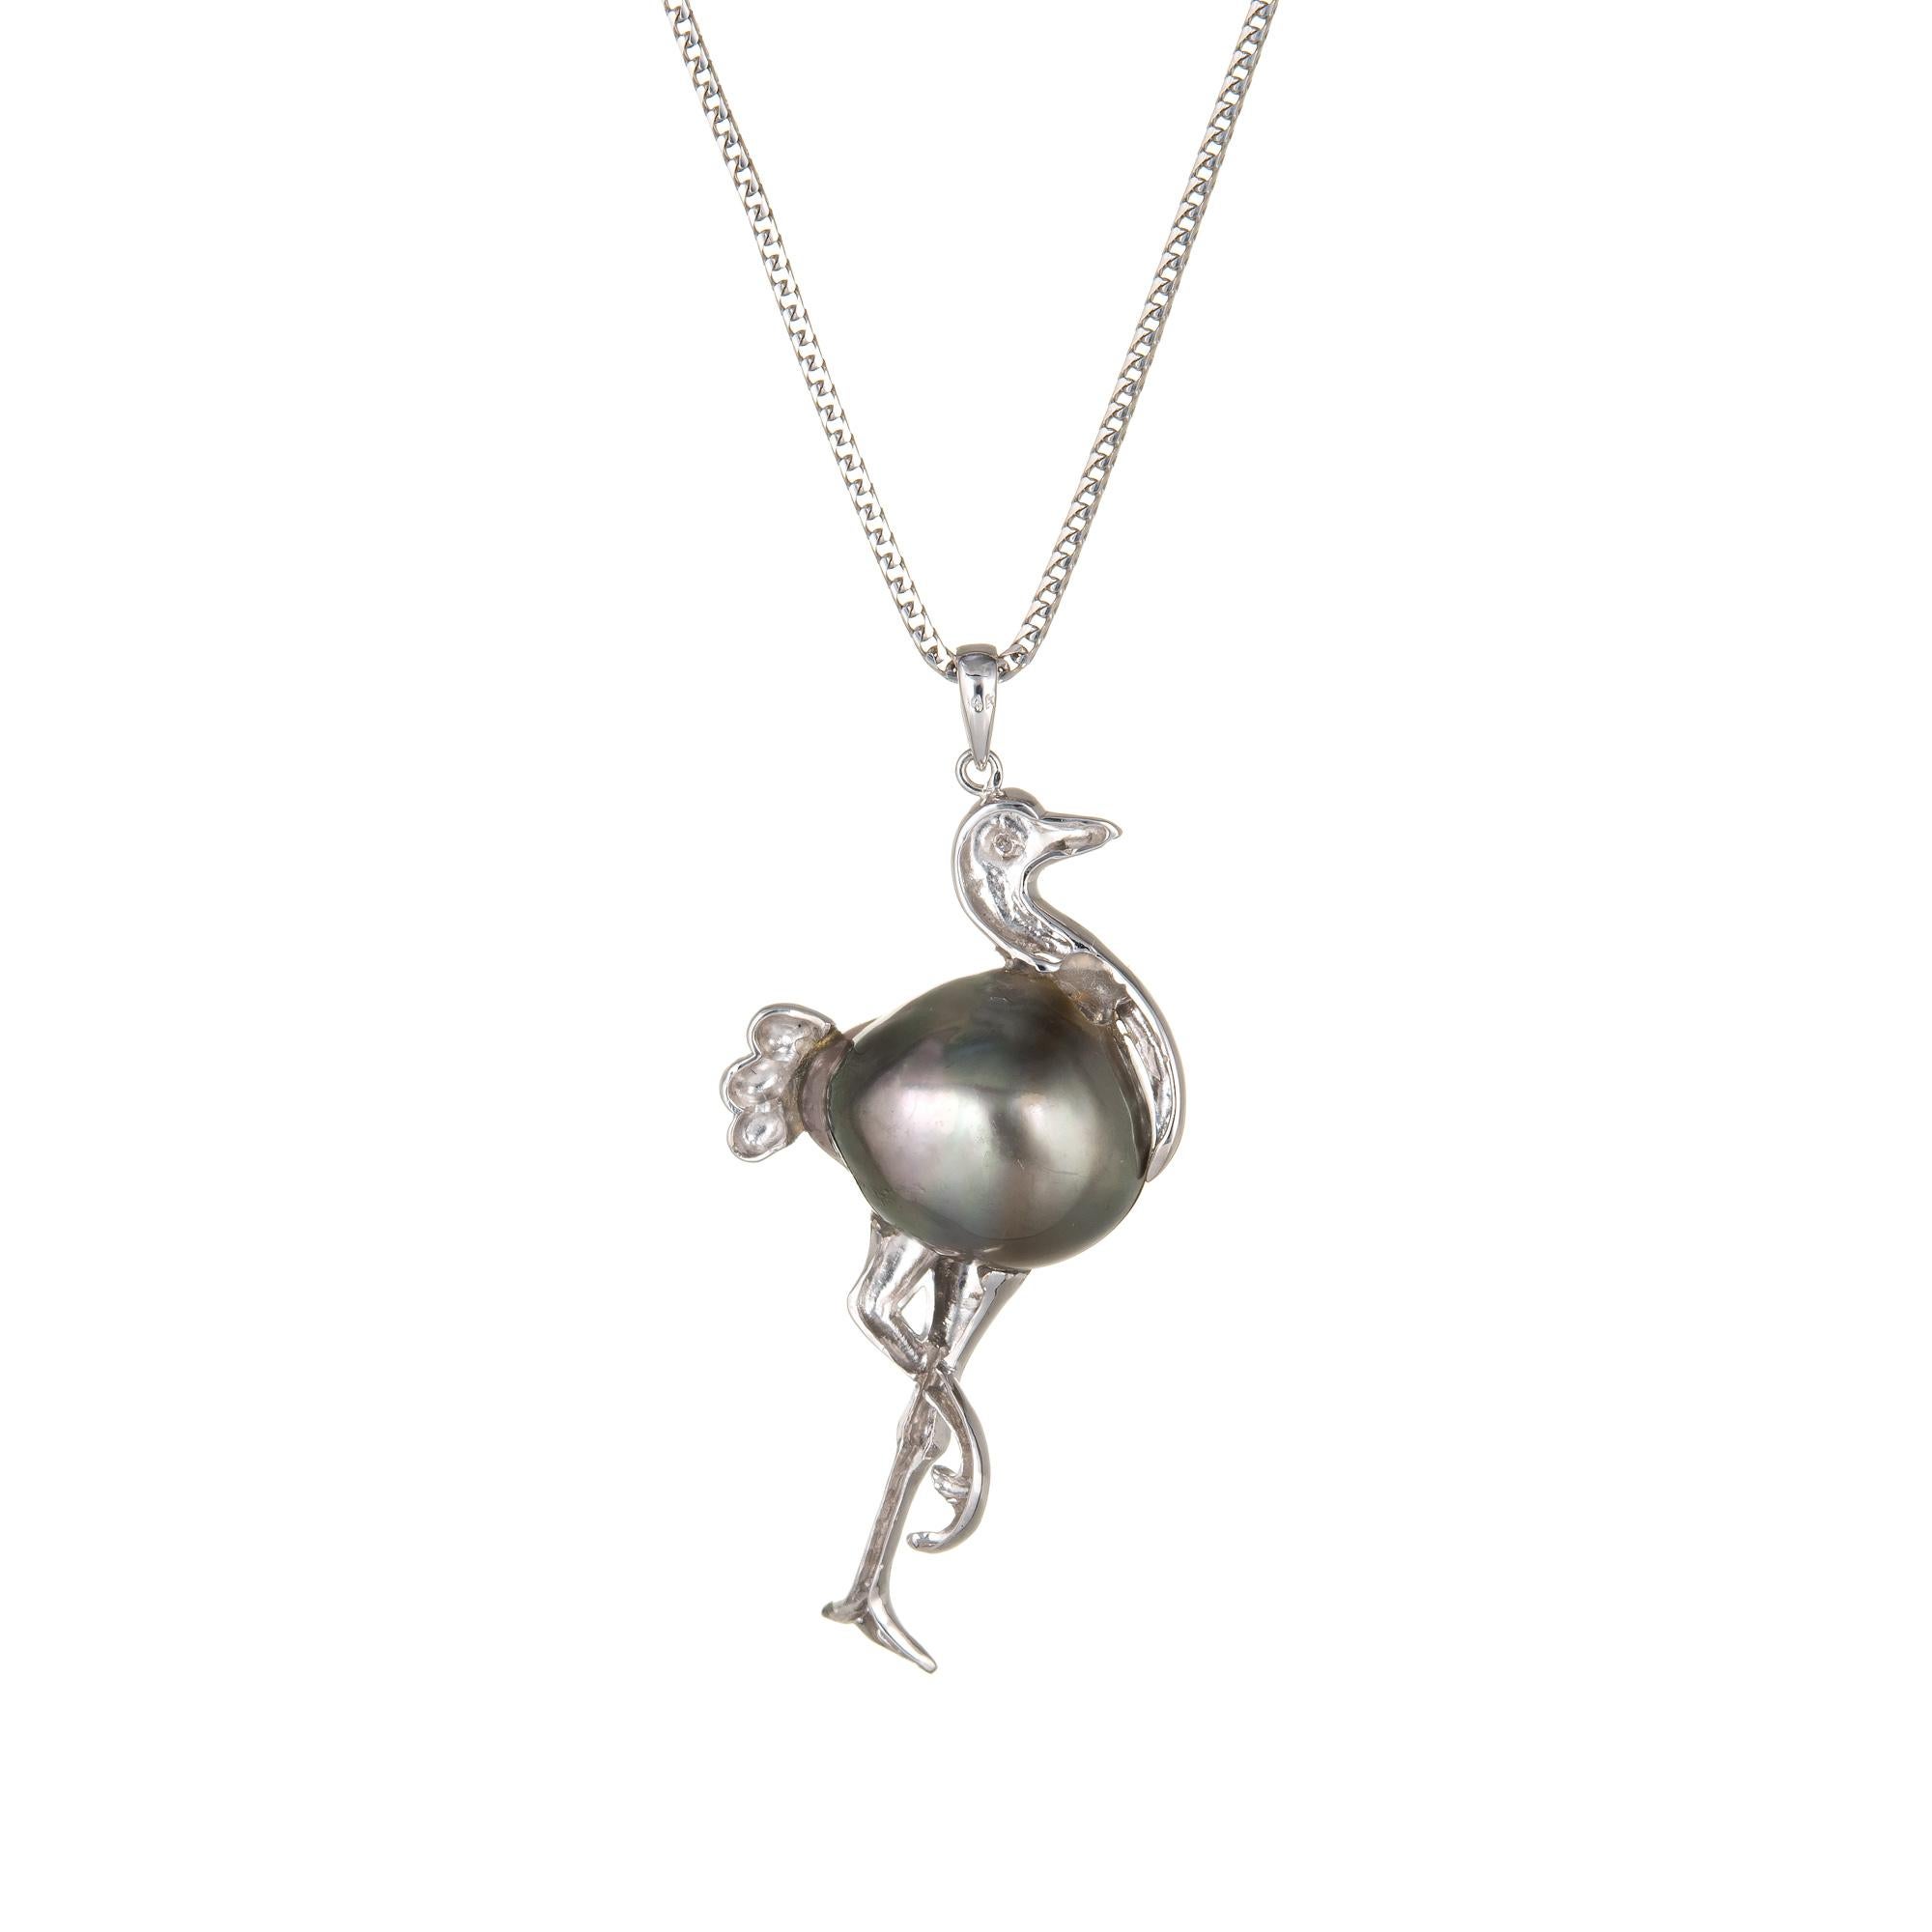 Stylish & unique stork pendant & necklace crafted in 14k white gold.  

Black baroque pearl measures 17mm x 13.5mm. One estimated 0.01 carat diamond is set into the eye (estimated at I-J color and SI2 clarity). 

The stylish pendant features a